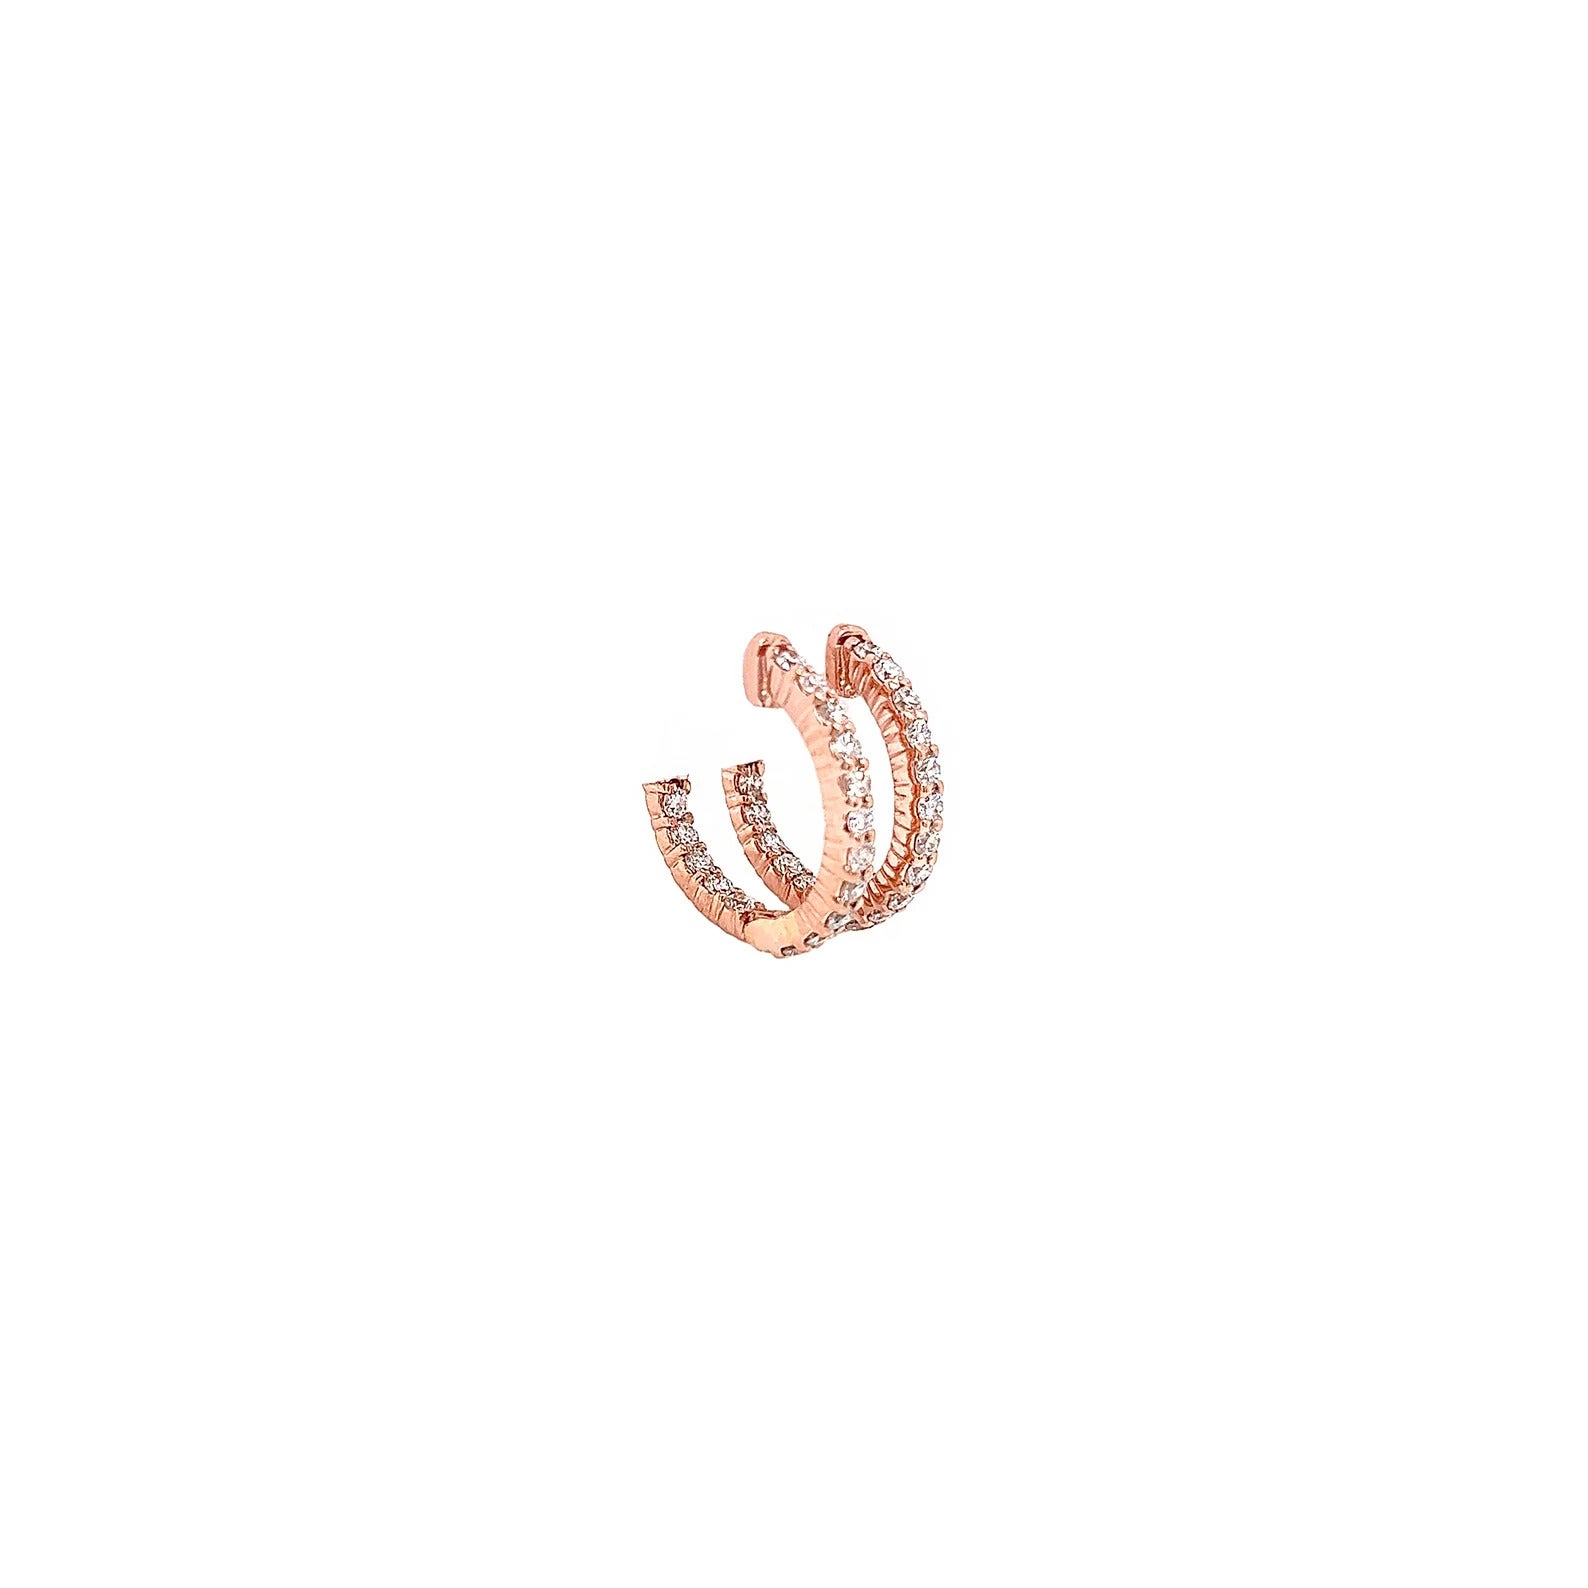 0.95 Carat Ladies Pave-Set Hoop Earrings in Rose Gold 

-Metal Type: 14K Rose Gold
-0.95 Carat Round Natural Diamonds 
-G-H Color
-VS Clarity

Made in New York City.